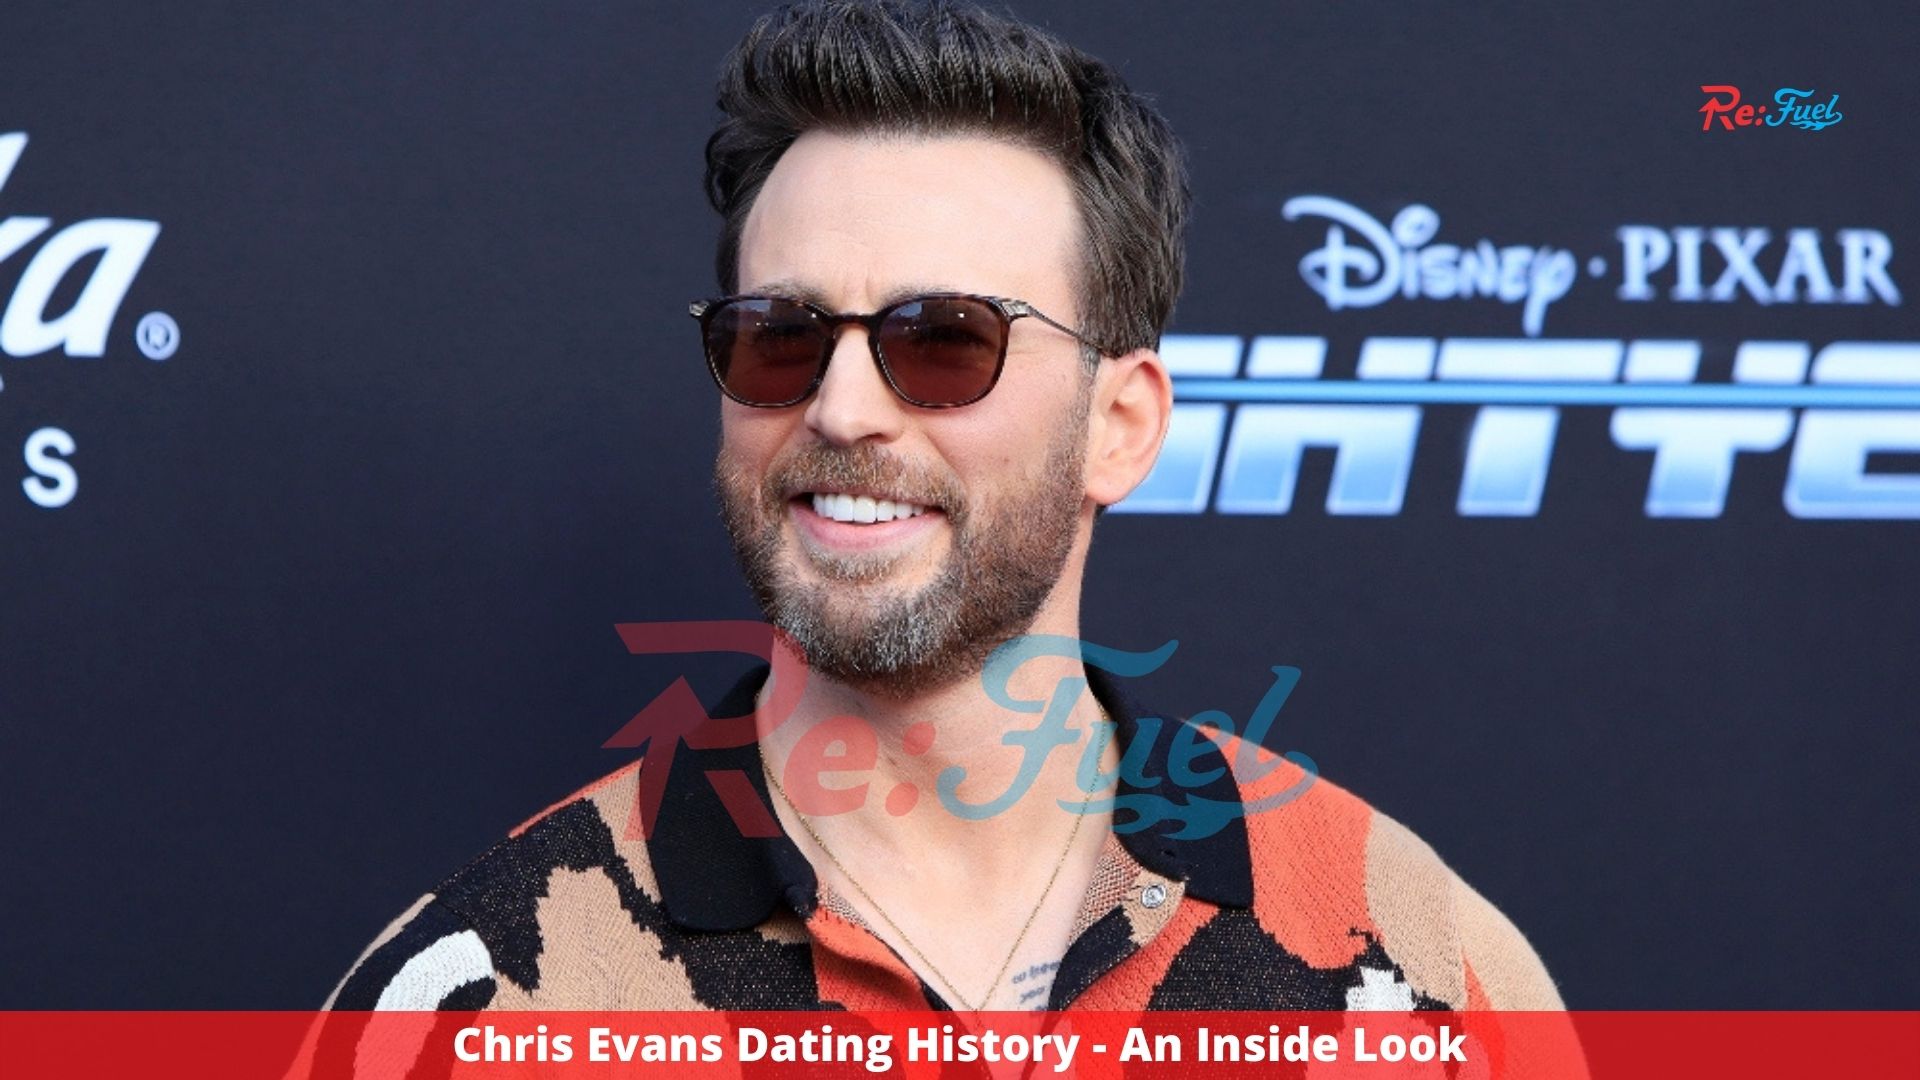 Chris Evans Dating History - An Inside Look